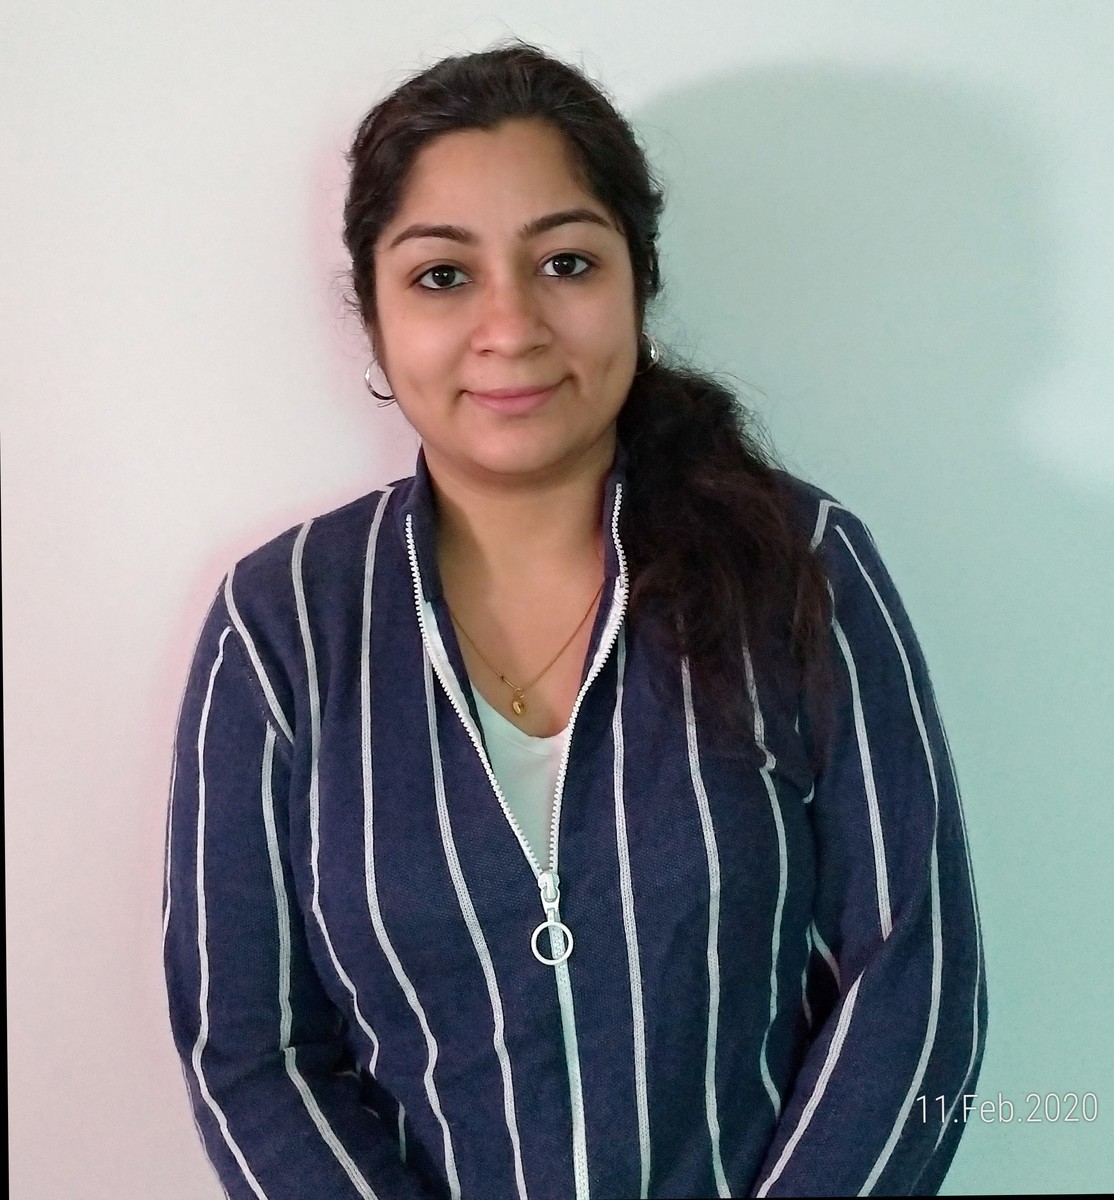 Nandini Swaminathan chose to study for PhD at the Department of Chemistry, when she discovered the professors are researching nanomaterials. She works on the synthesis of nanomaterials for biomedical applications. /Photo provided by interviewee